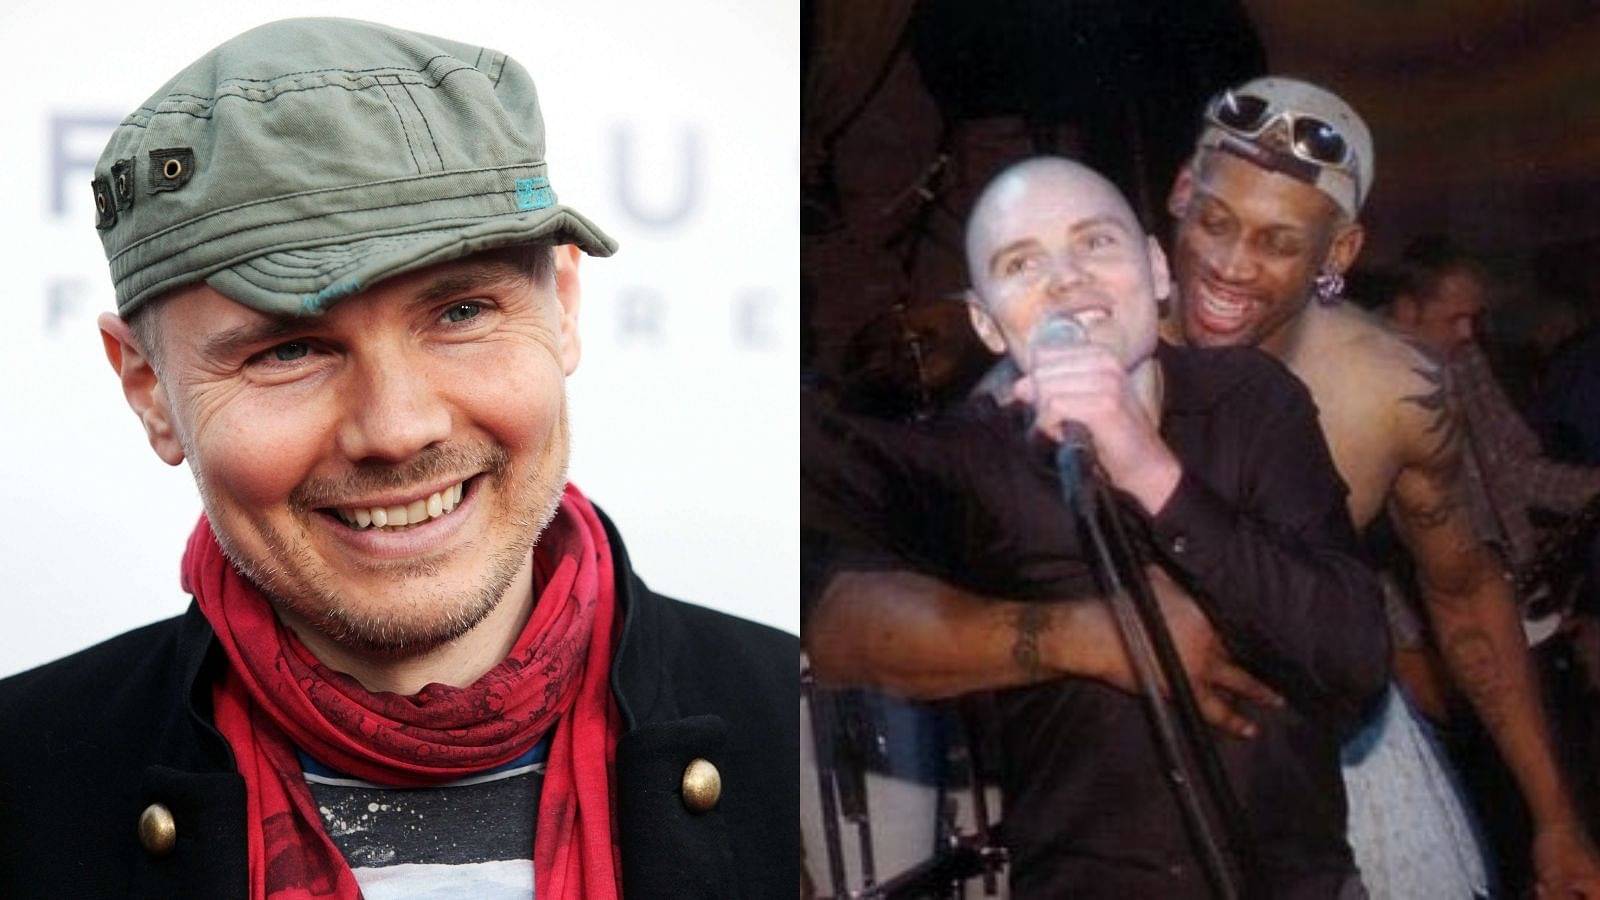 "Dennis Rodman could pick up a 250-pound man with one hand": When Billy Corgan talked about The Worm's freakish strength on JRE, mentioned guarding 340 pounds Shaq 1-on-1